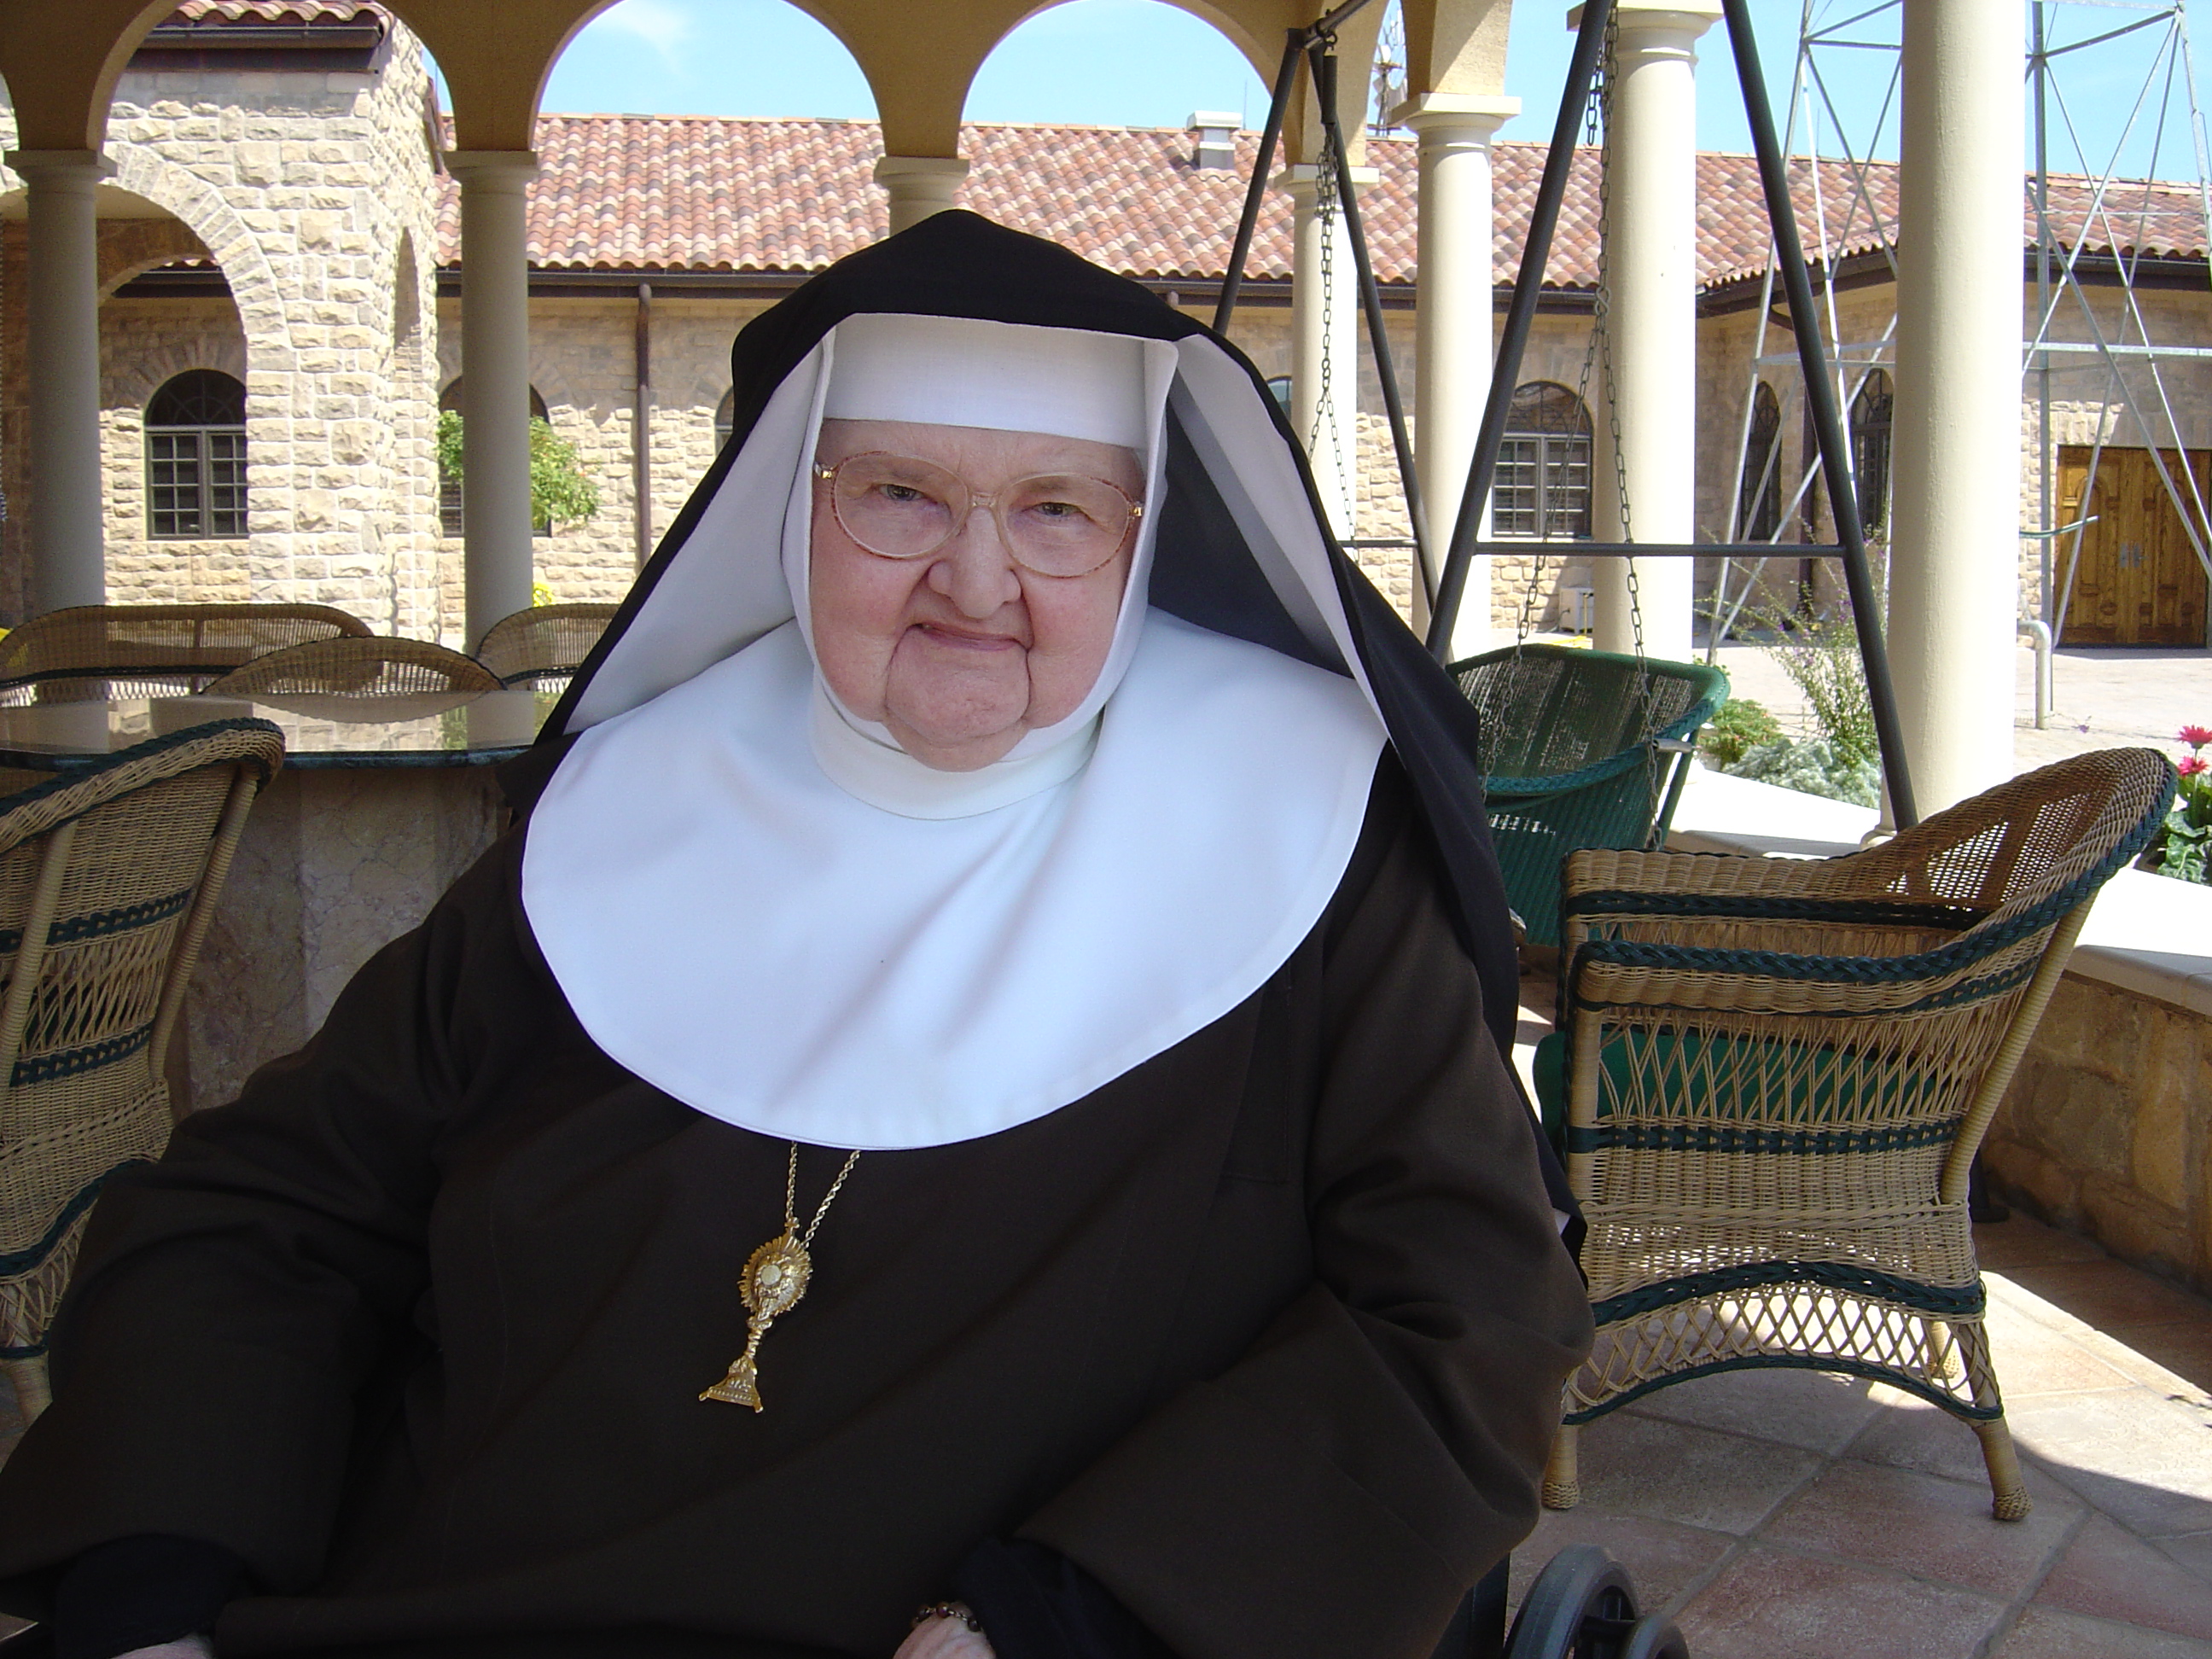 mother angelica pro life quote